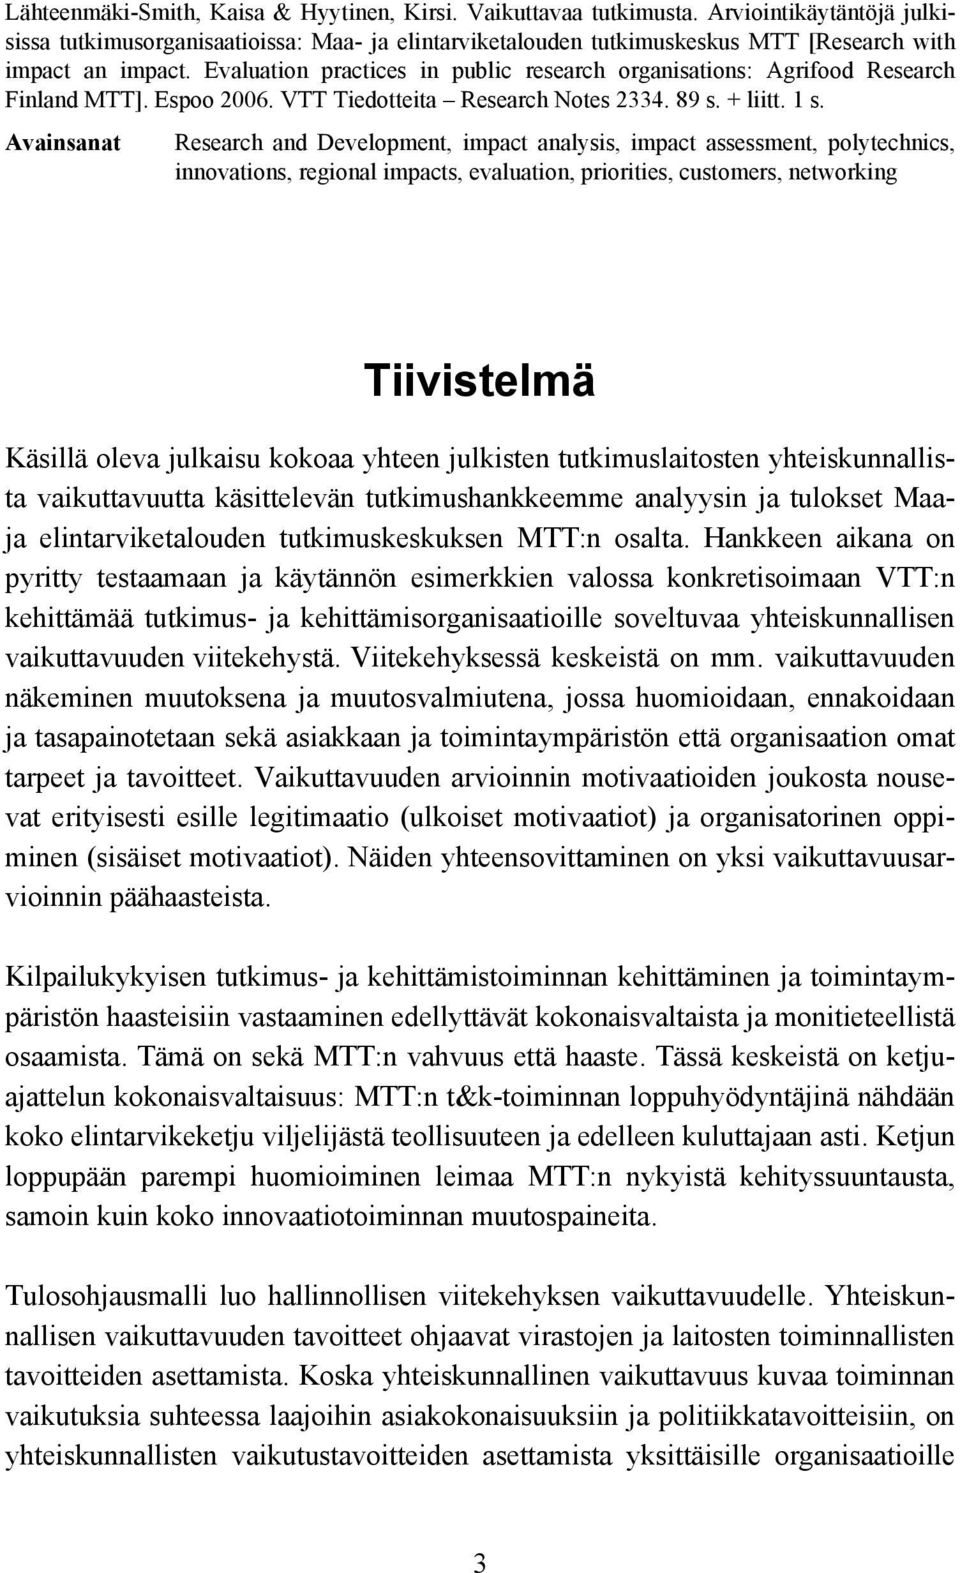 Evaluation practices in public research organisations: Agrifood Research Finland MTT]. Espoo 2006. VTT Tiedotteita Research Notes 2334. 89 s. + liitt. 1 s.